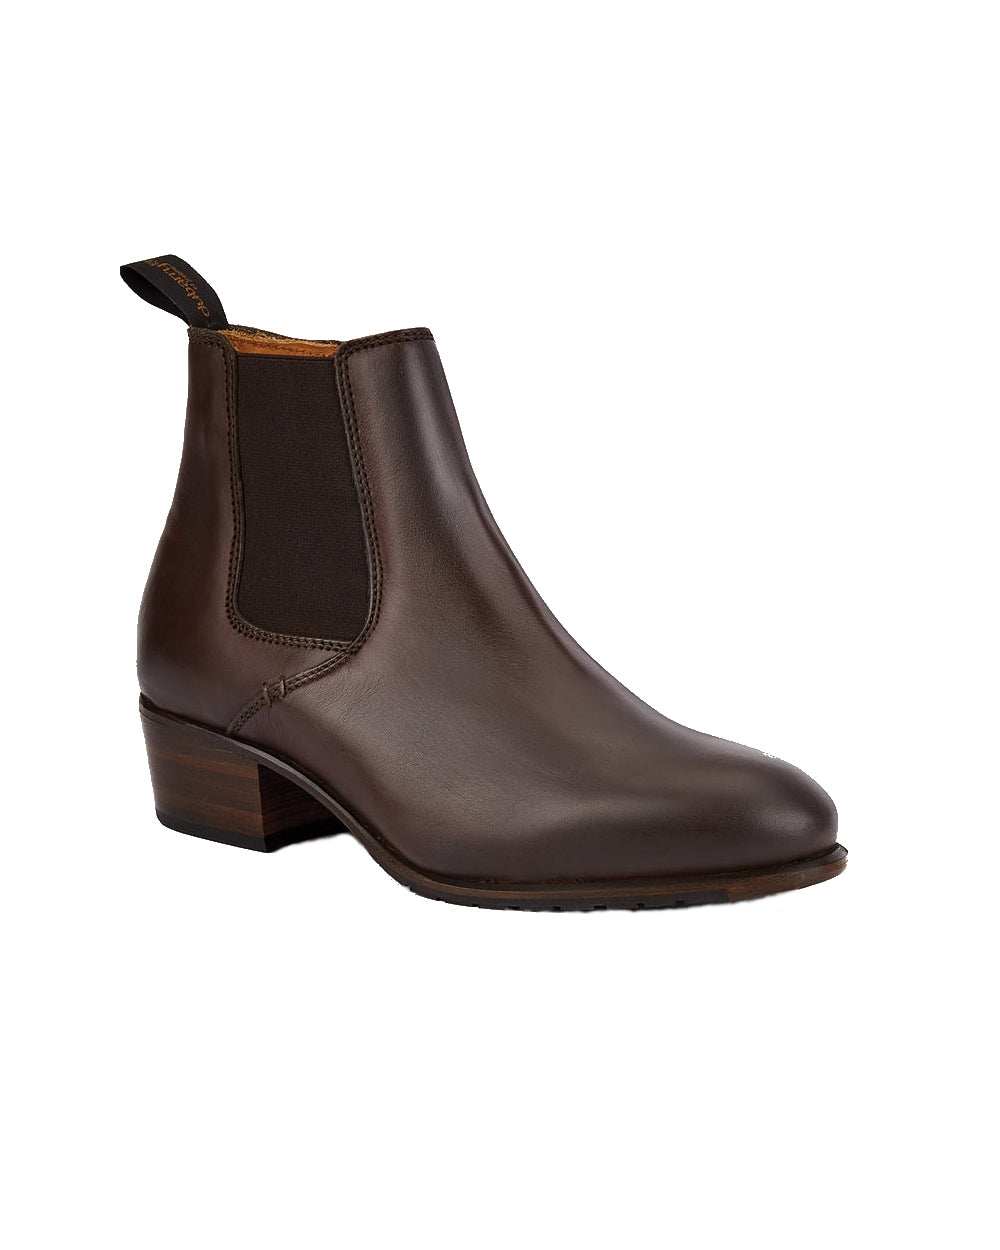 Dubarry Bray Chelsea Boots in Old Rum 